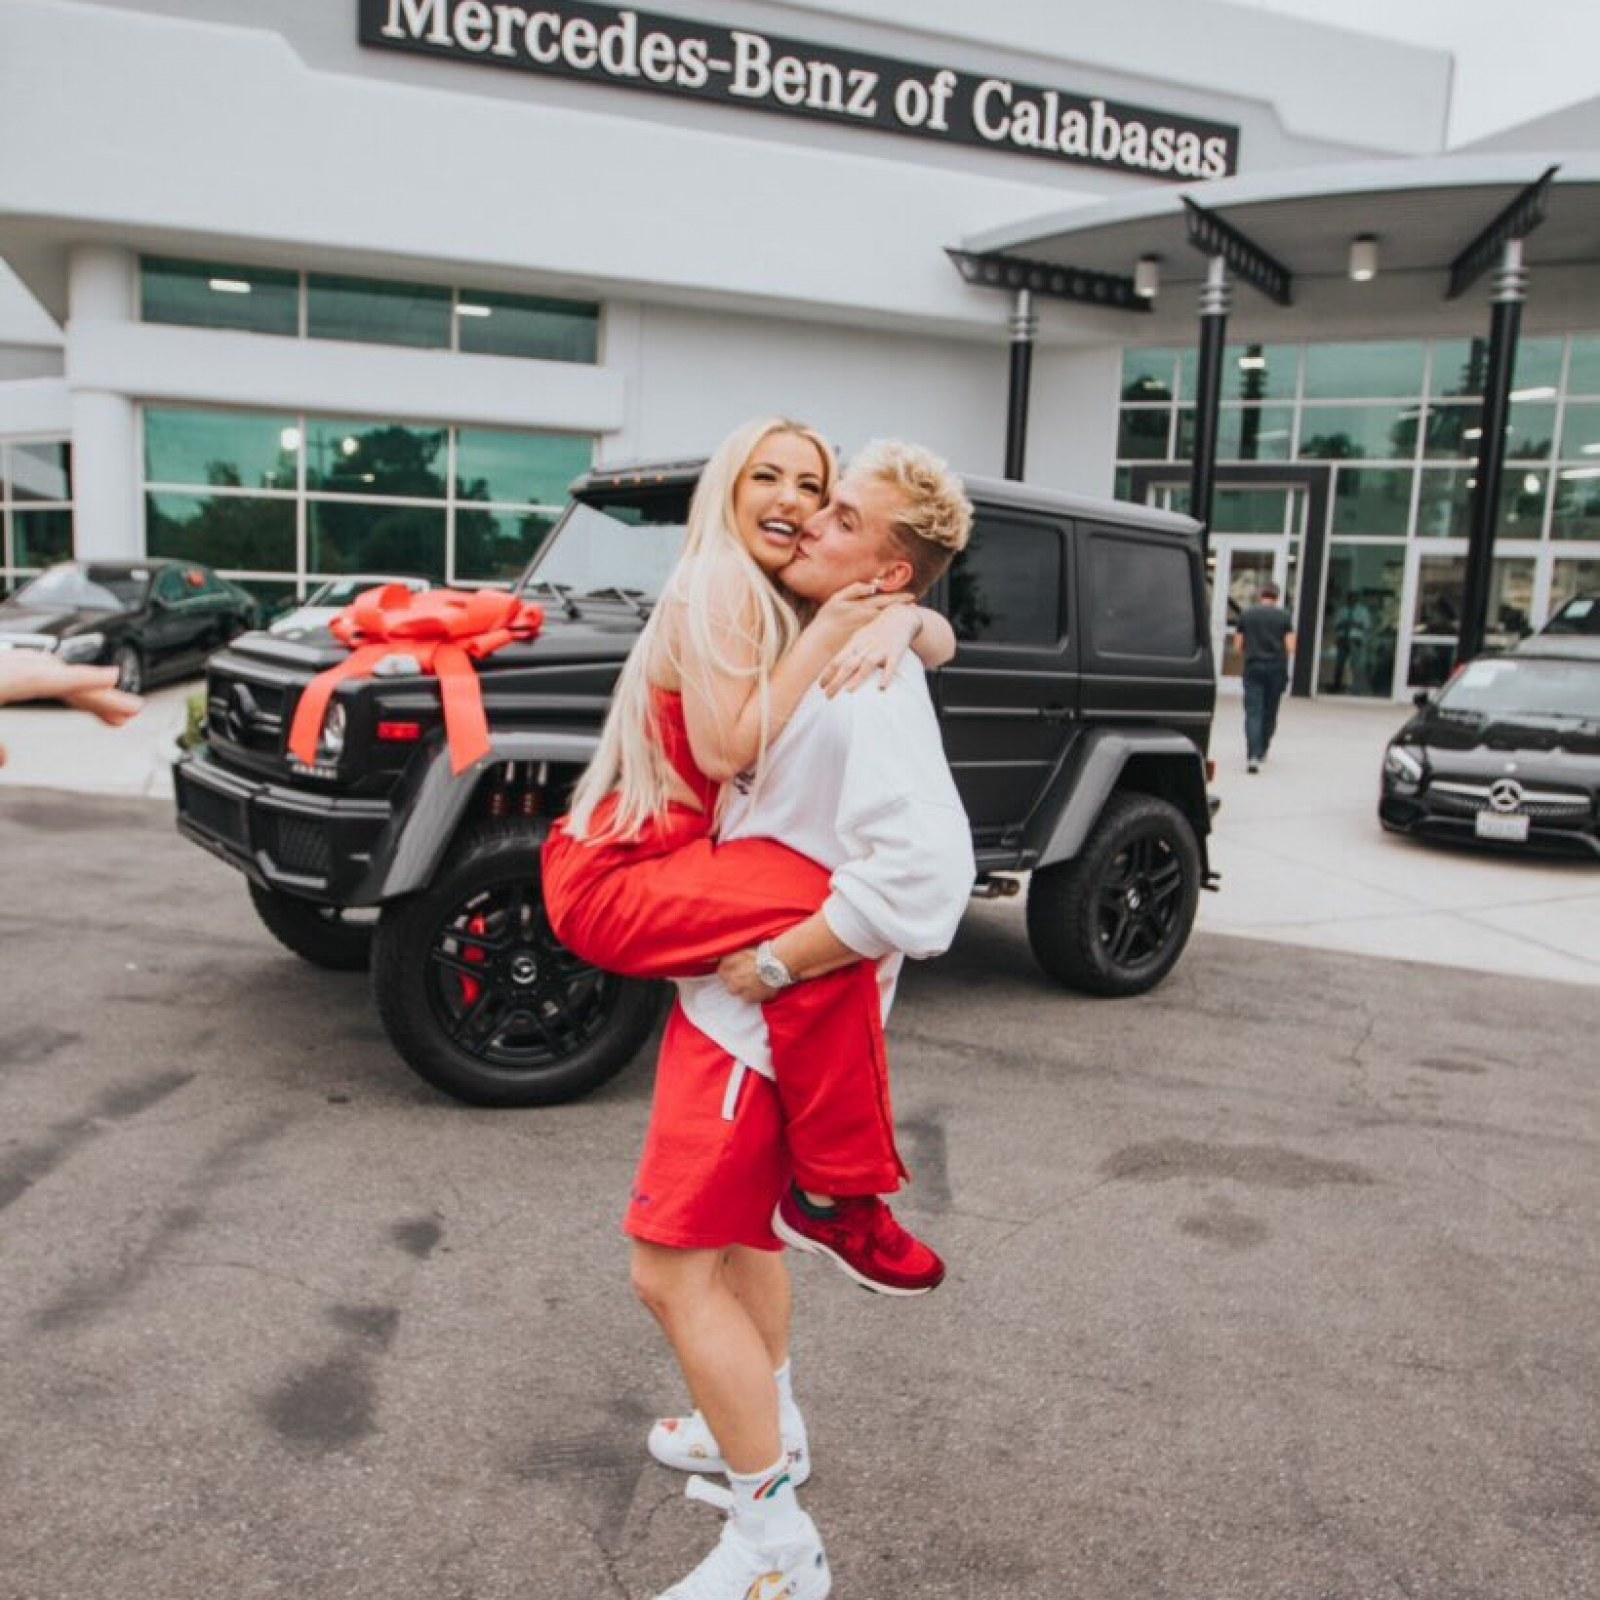 Jake Paul and Tana Mongeau Engaged? YouTubers Say It is Real